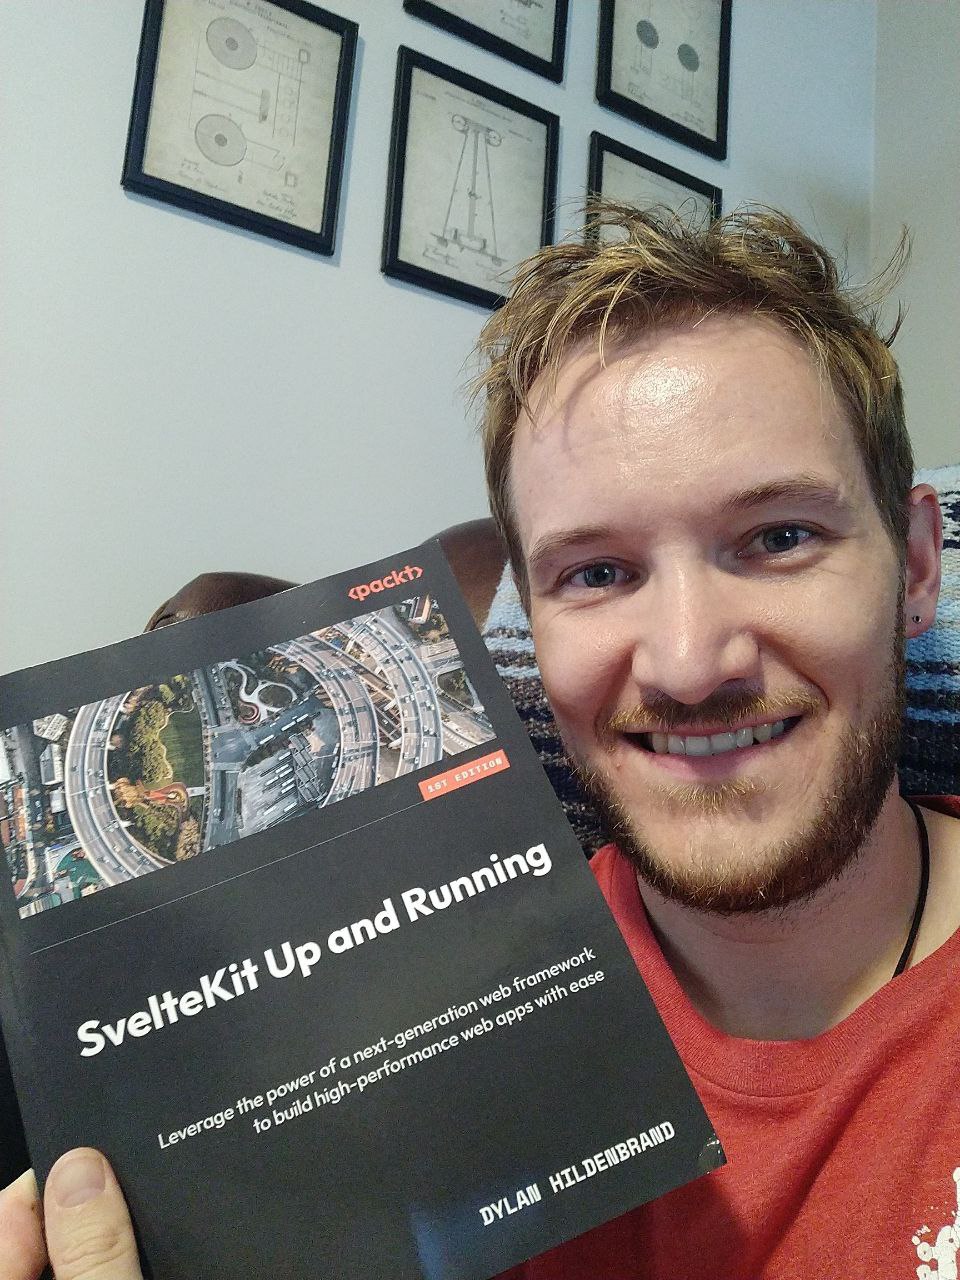 Author of the book SvelteKit Up and Running, Dylan Hildenbrand (that's me!) poses with a copy of his book in hand while smiling.